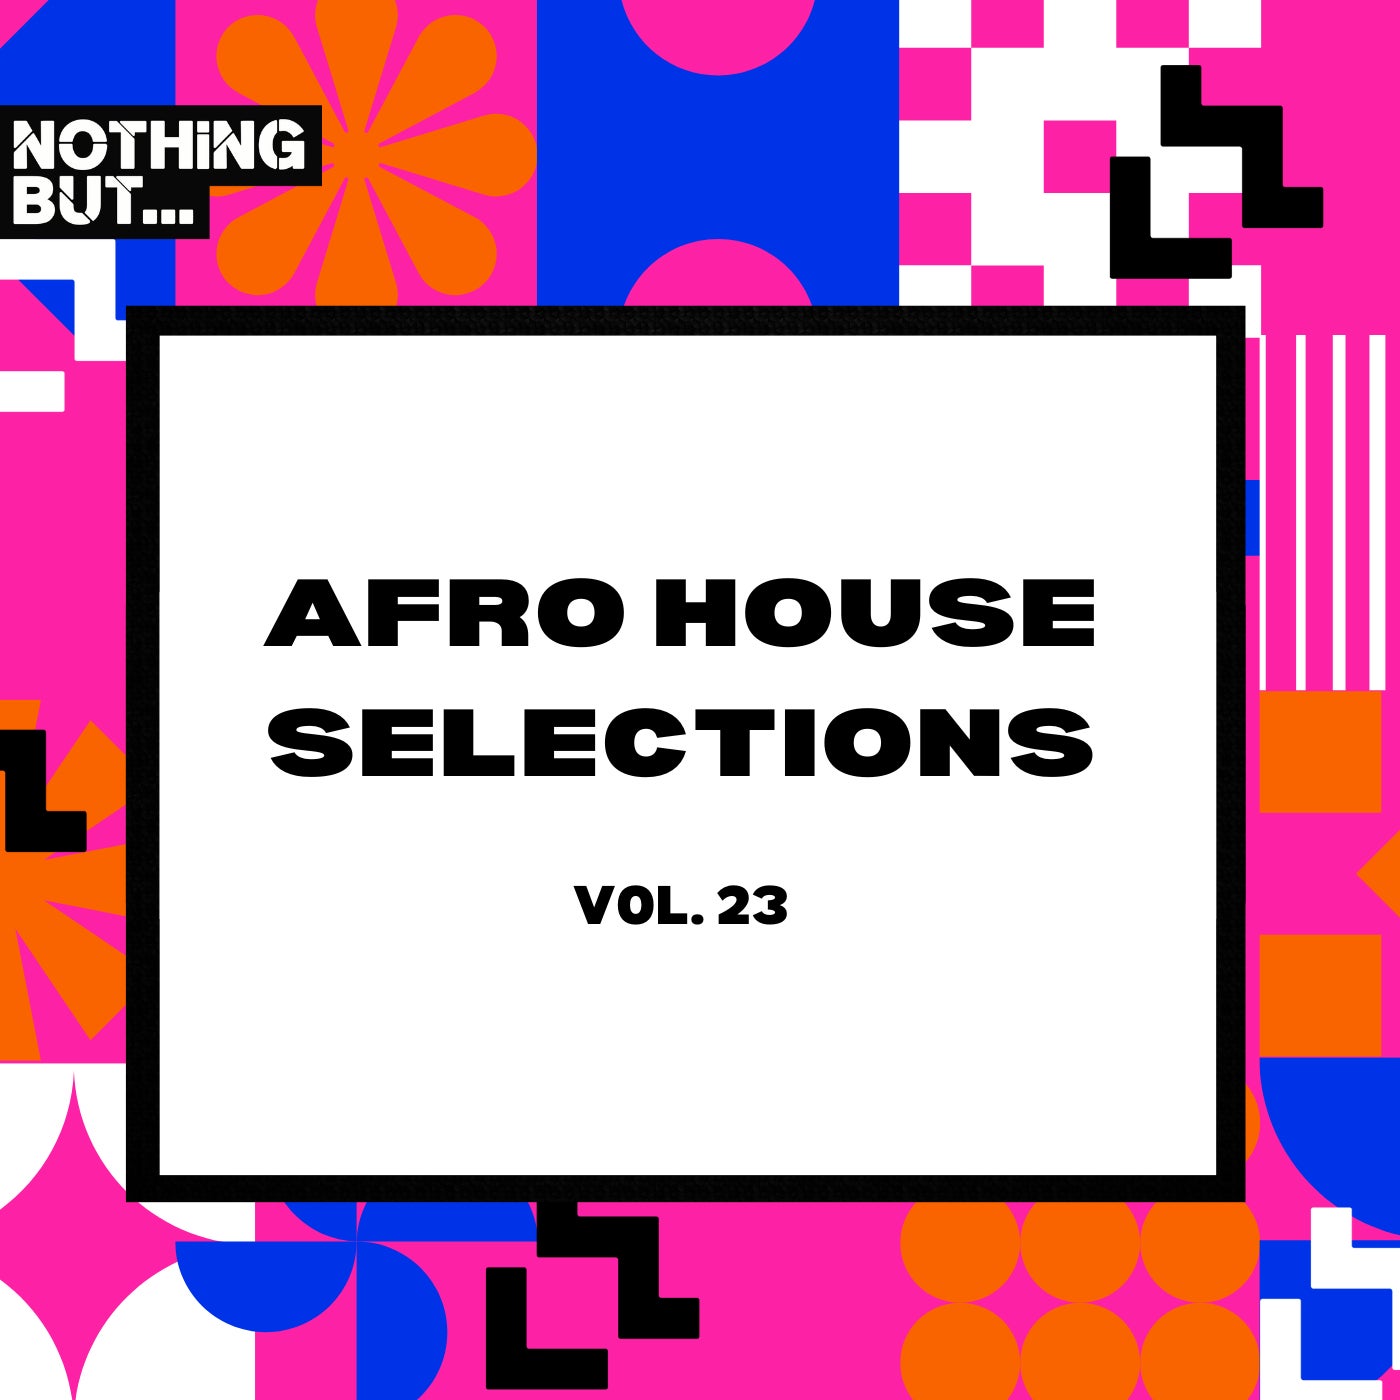 Nothing But... Afro House Selections, Vol. 23